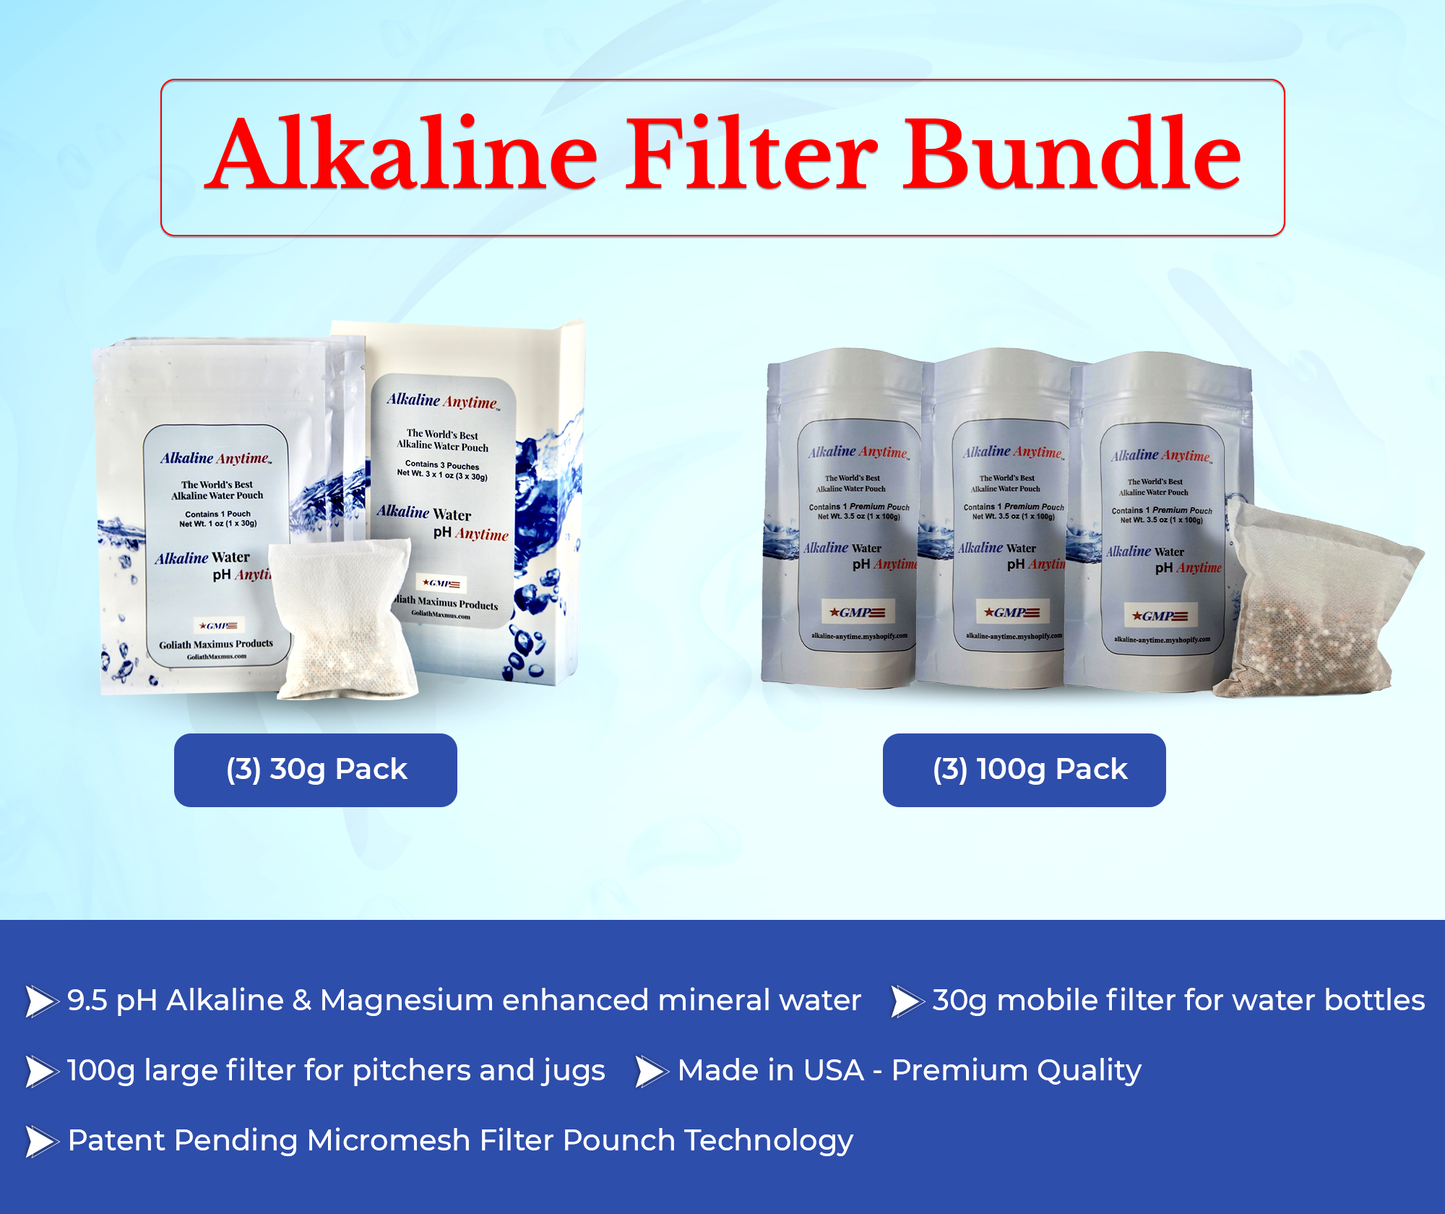 Alkaline Anytime Filter Bundle: Worlds Best Alkaline Water- 3 Pack of 30g and 3 Pack of 100g, Fit Any Container -9.5pH + Ionized Electrolytes